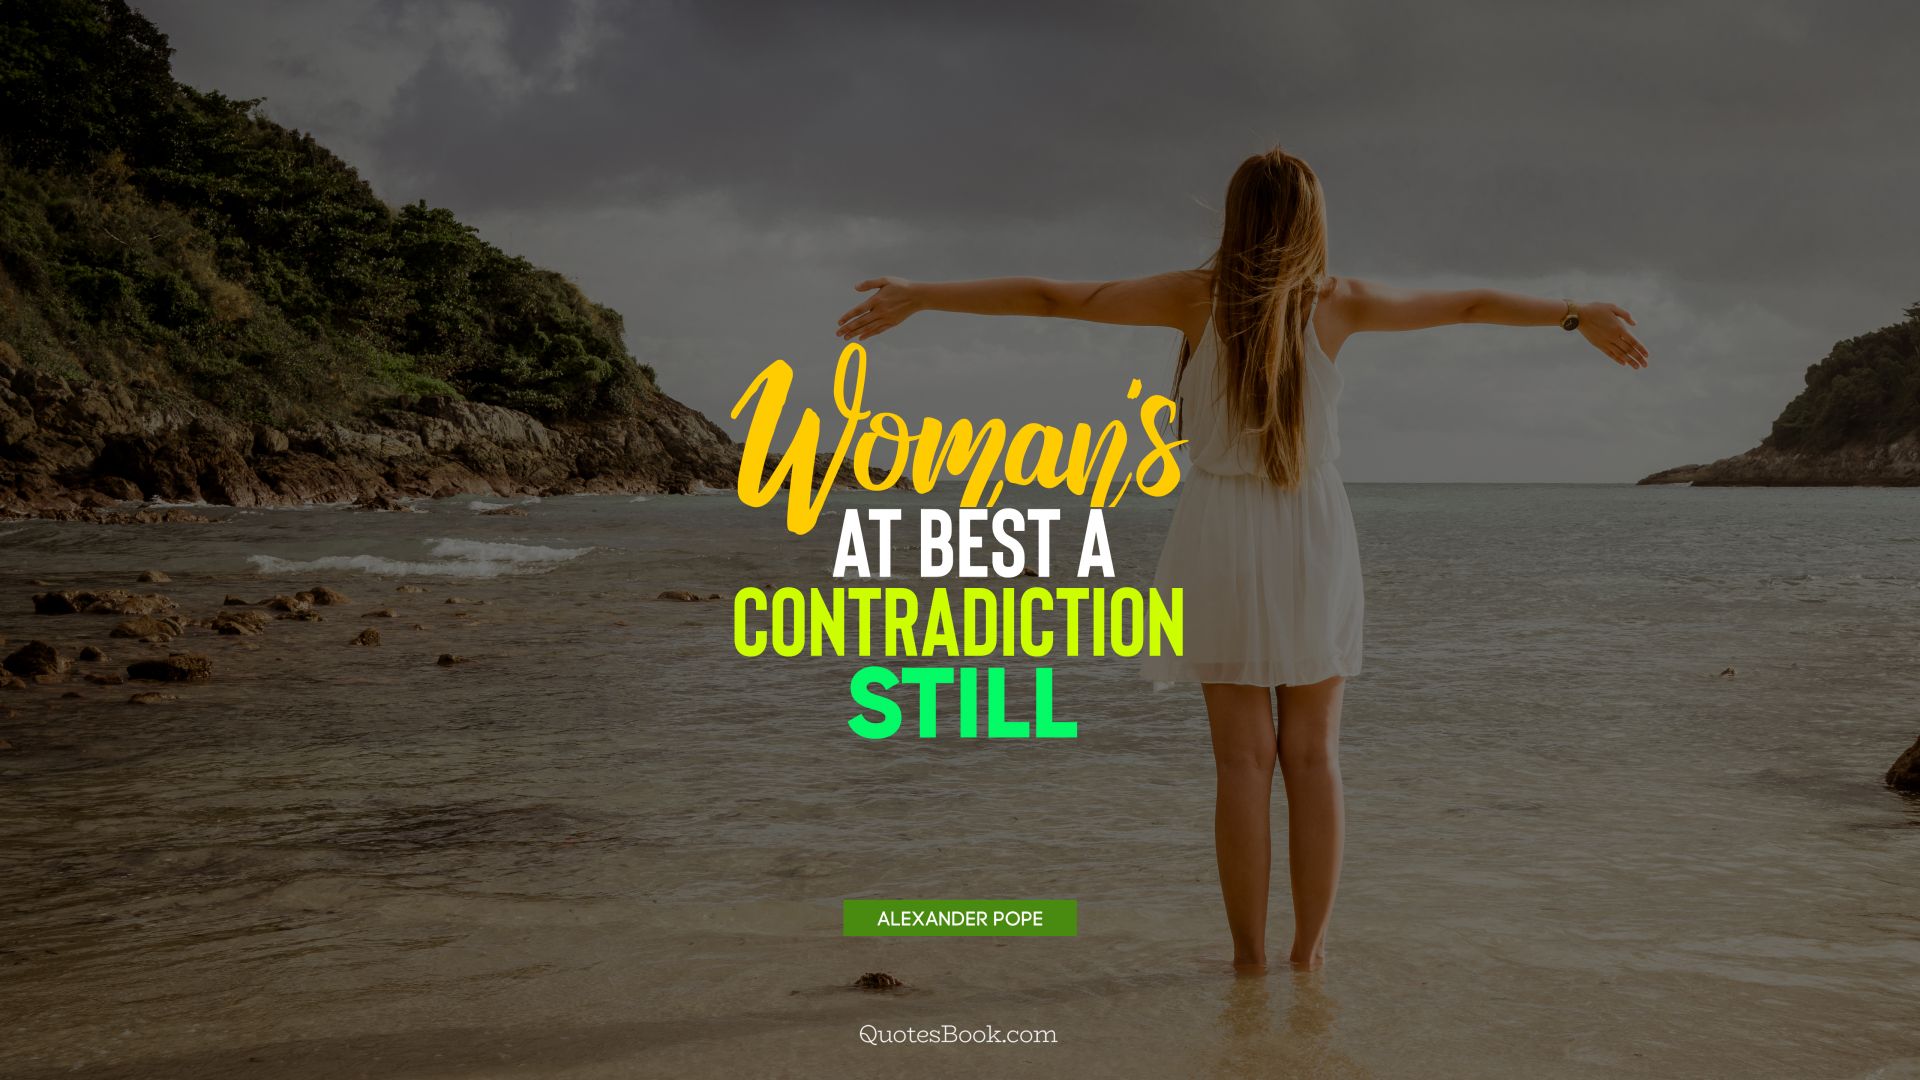 Woman's at best a contradiction still. - Quote by Alexander Pope